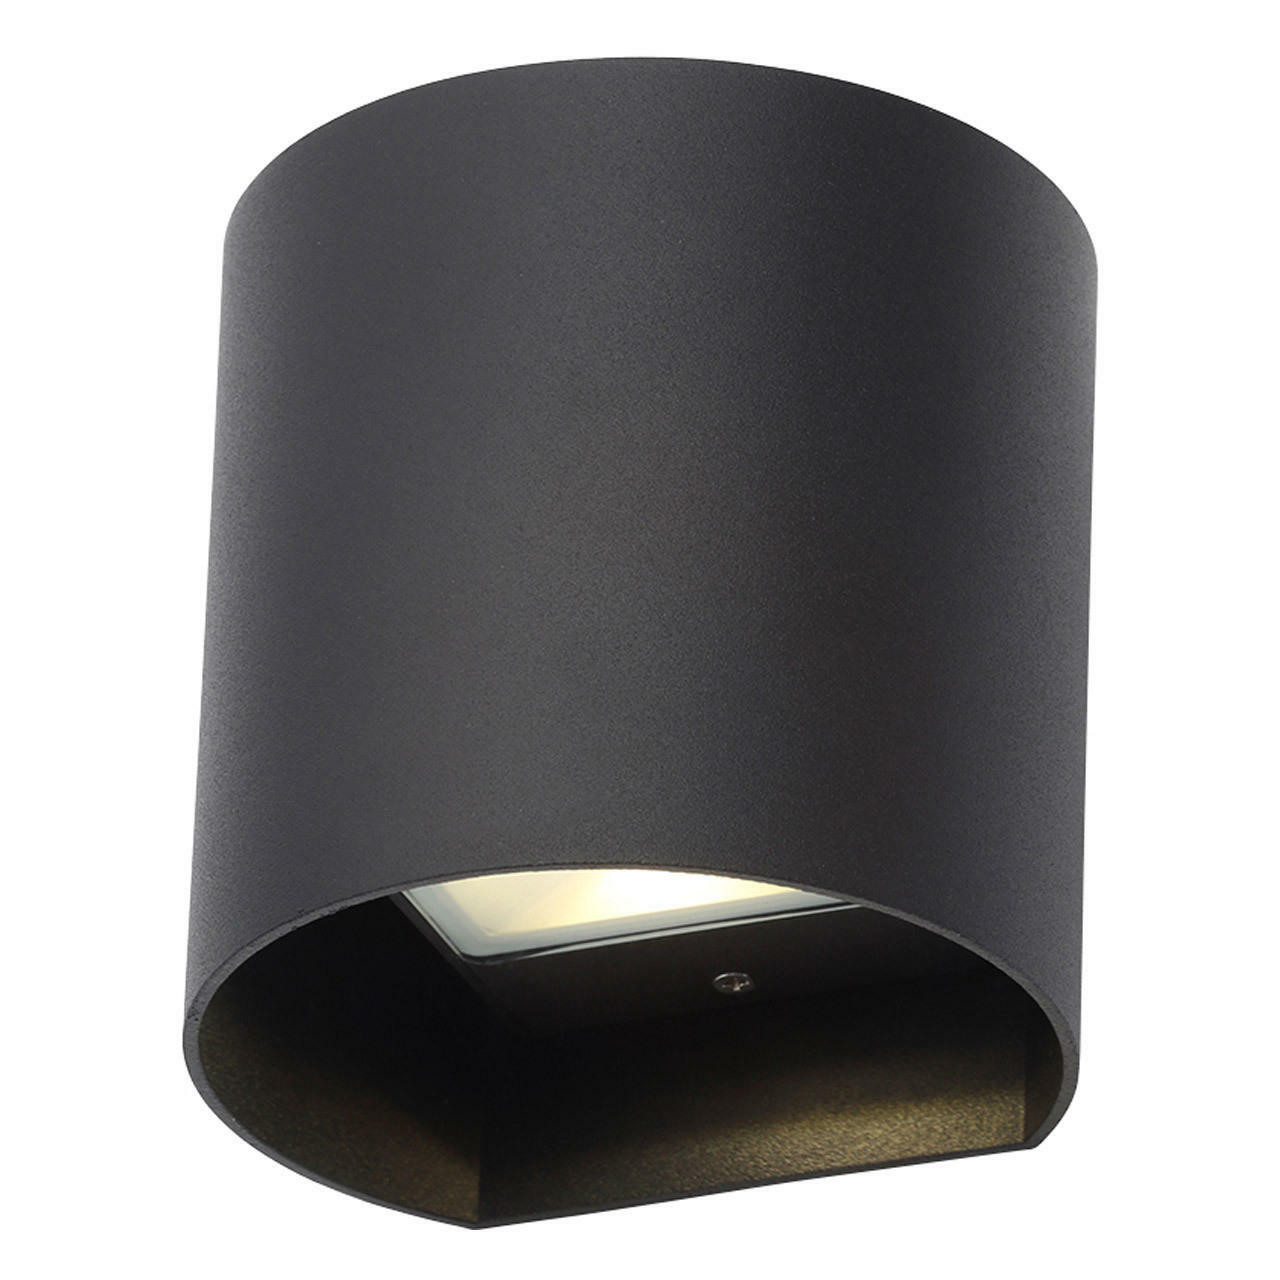 Zink MAUI 8W LED Outdoor Up and Down Wall Light Black